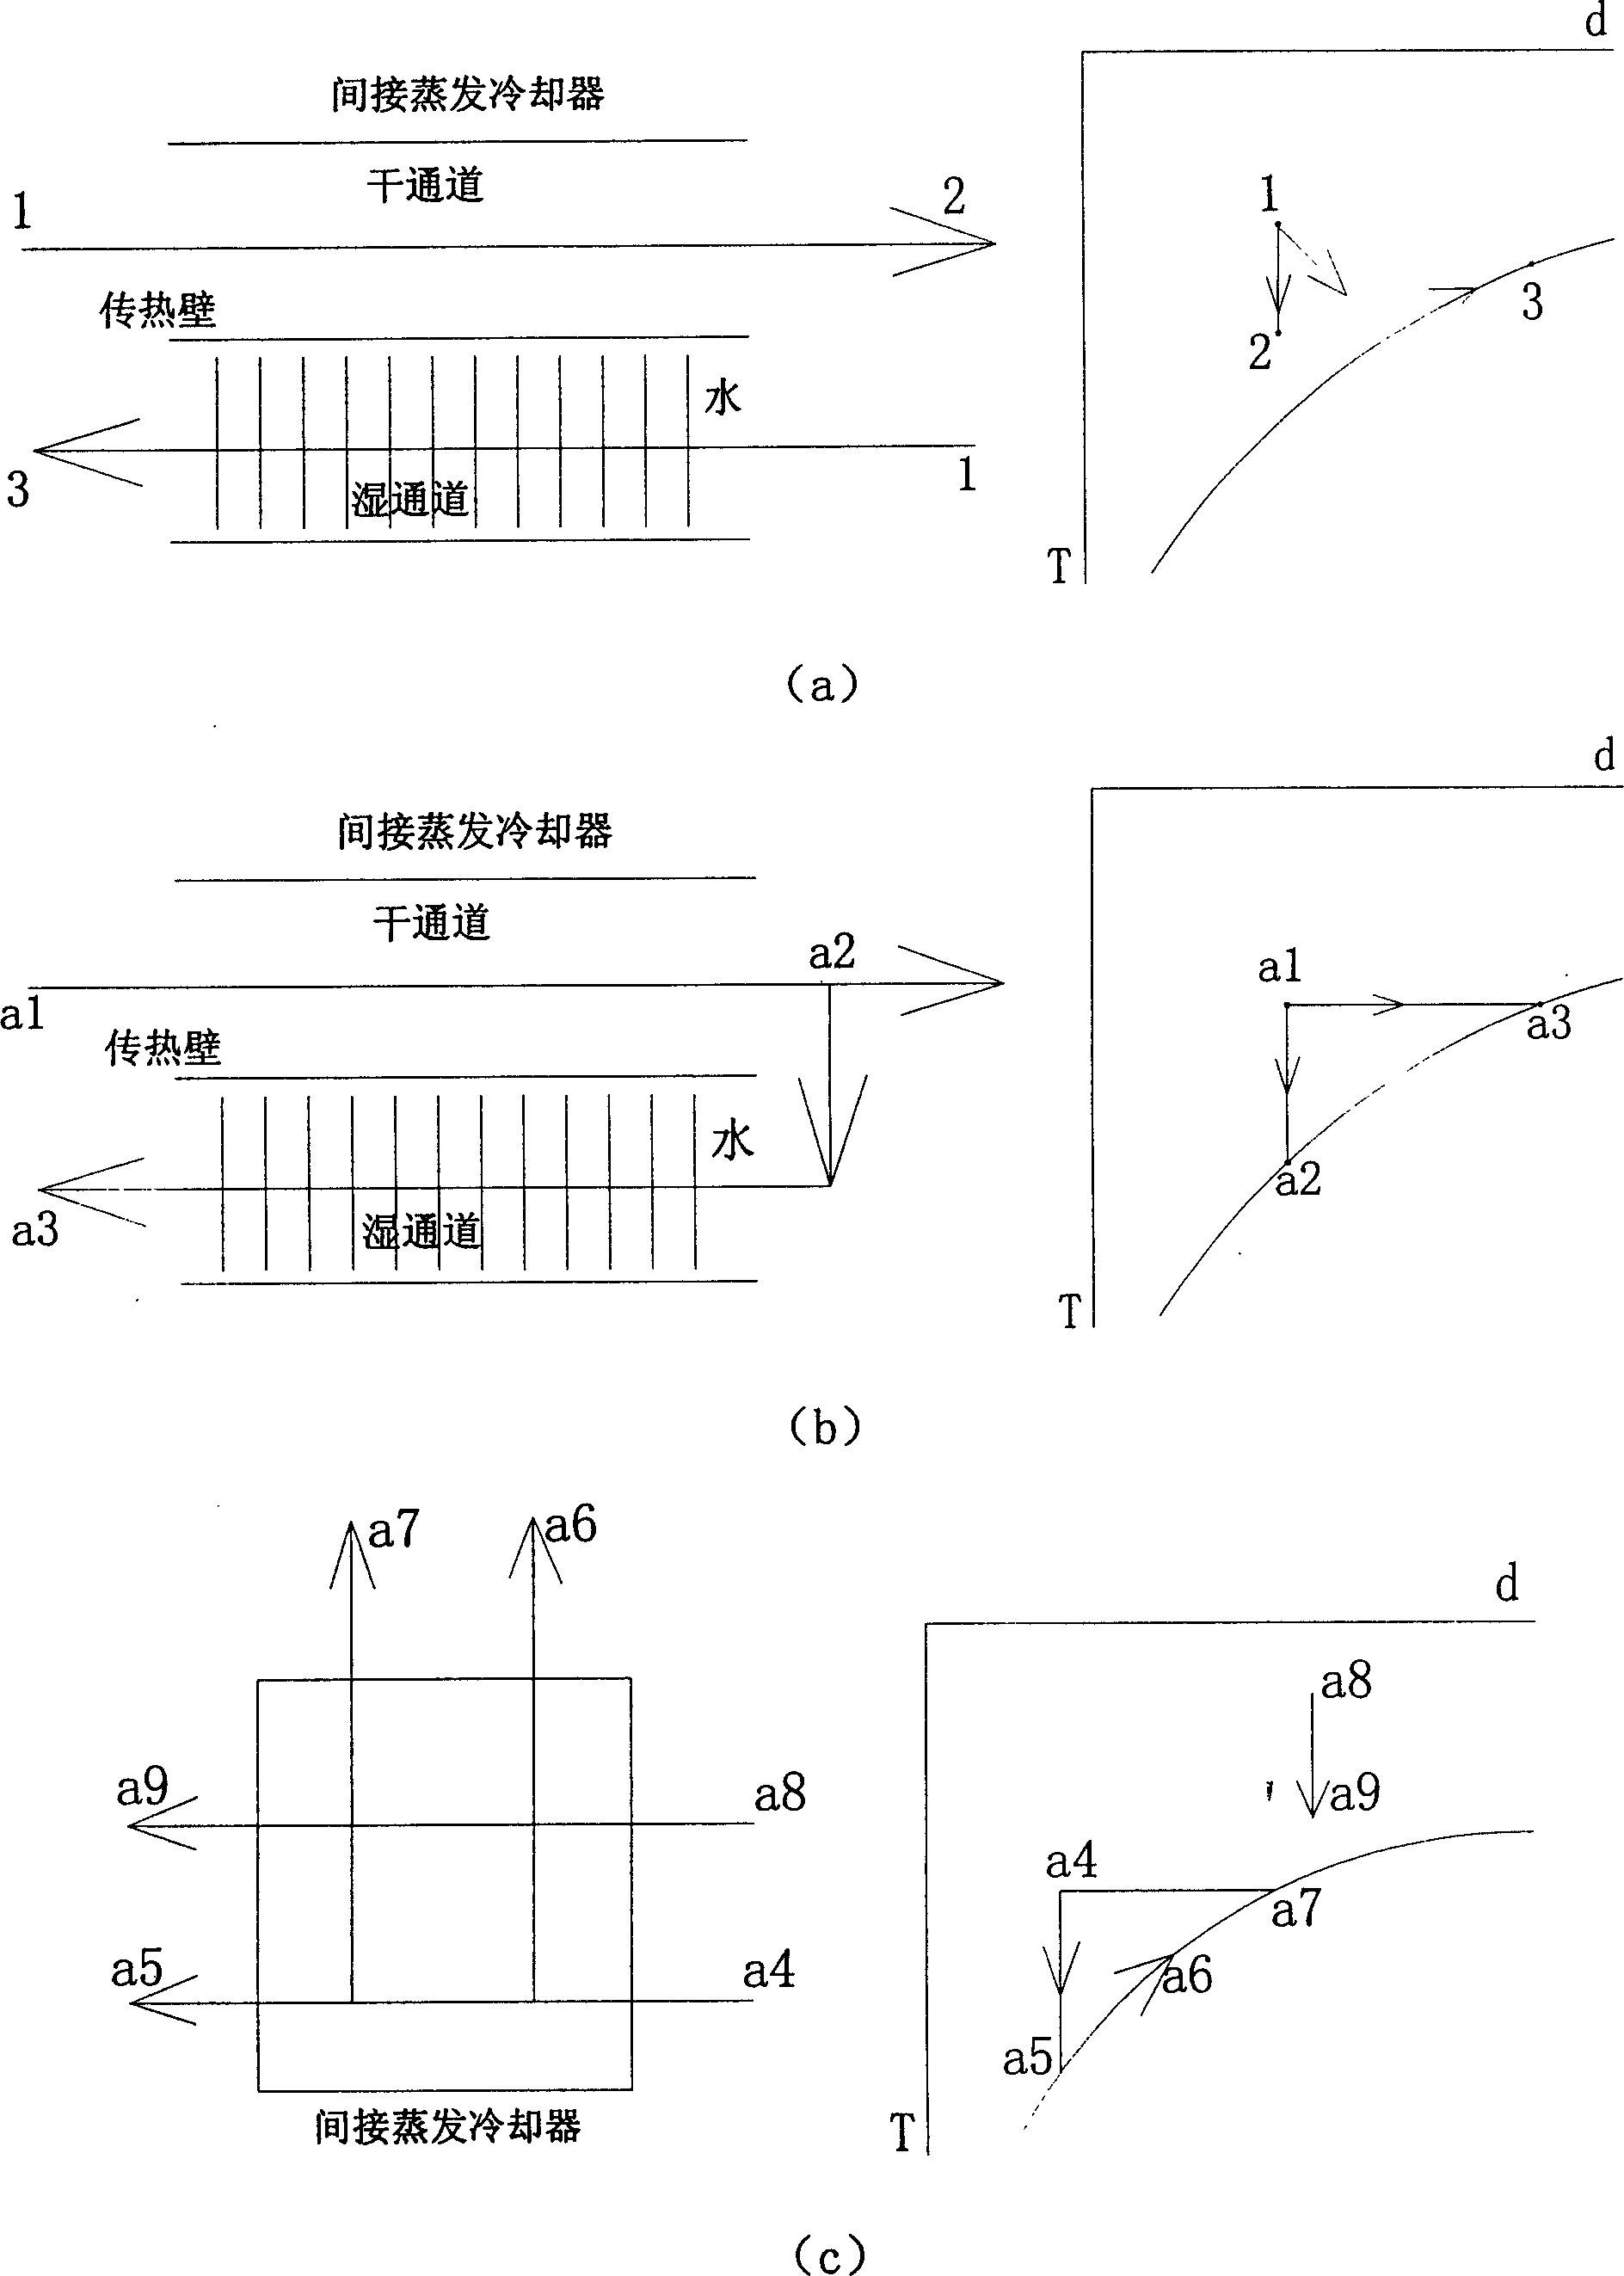 Method for adjusting indoor air environment